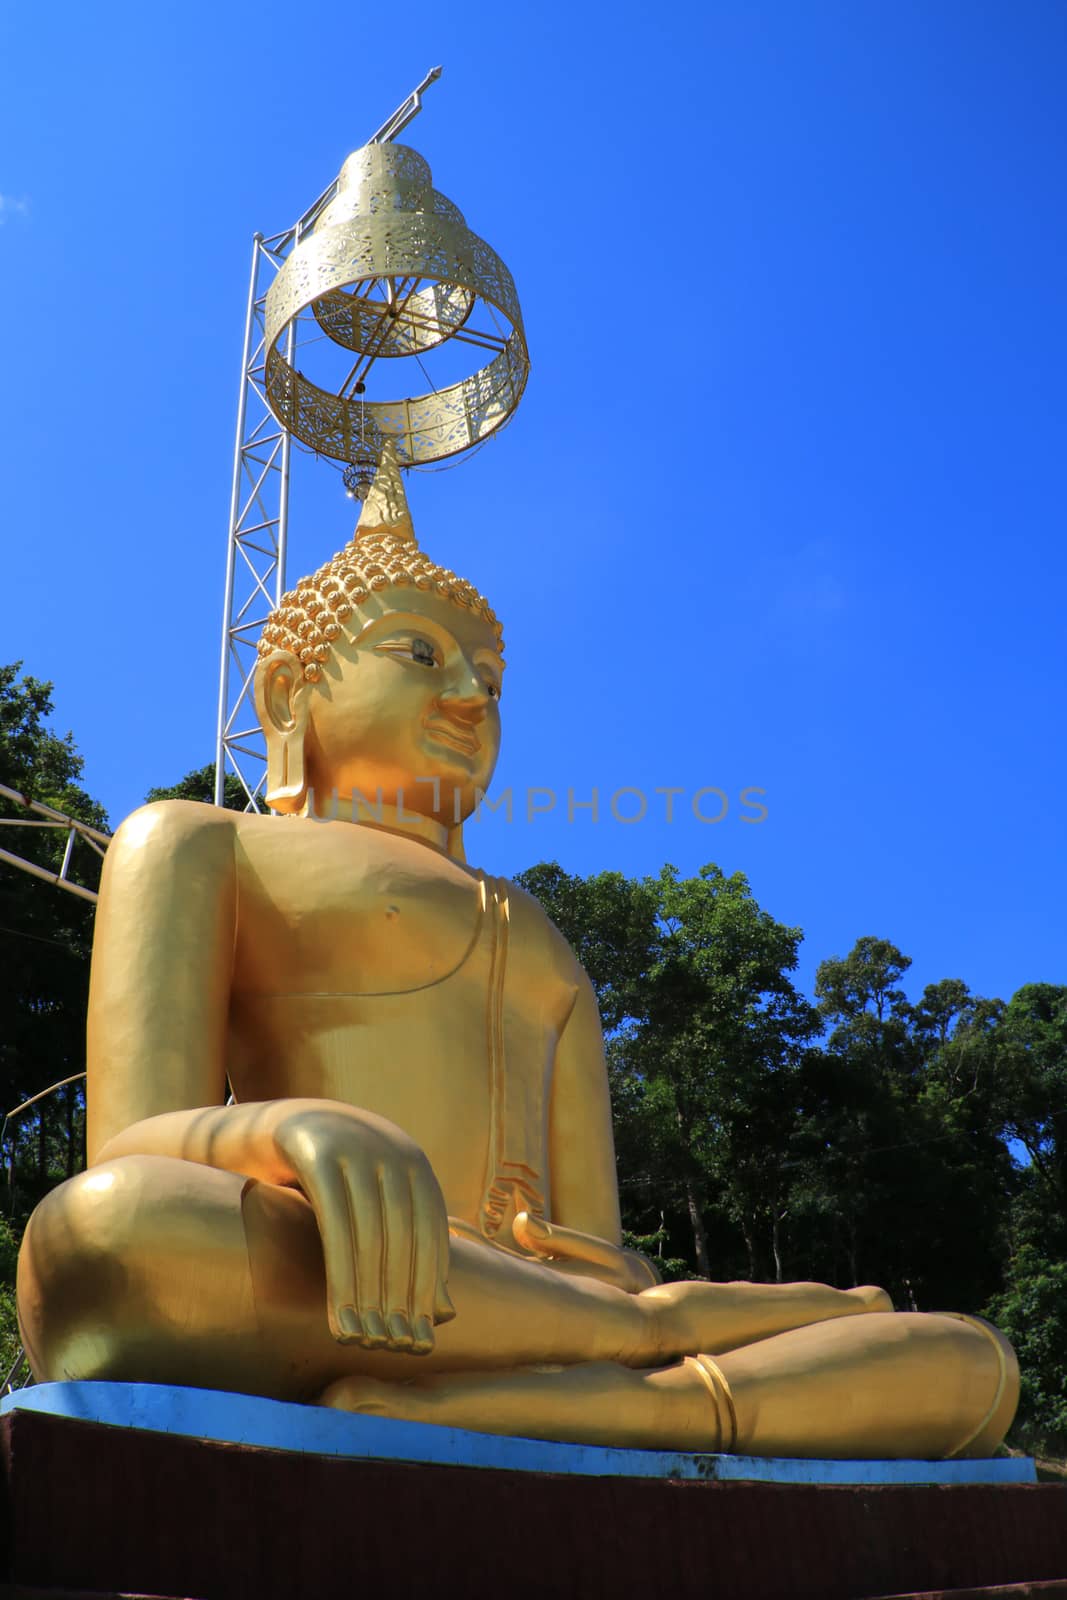 The golden image of Buddha which have Thai art umbrella over the head.